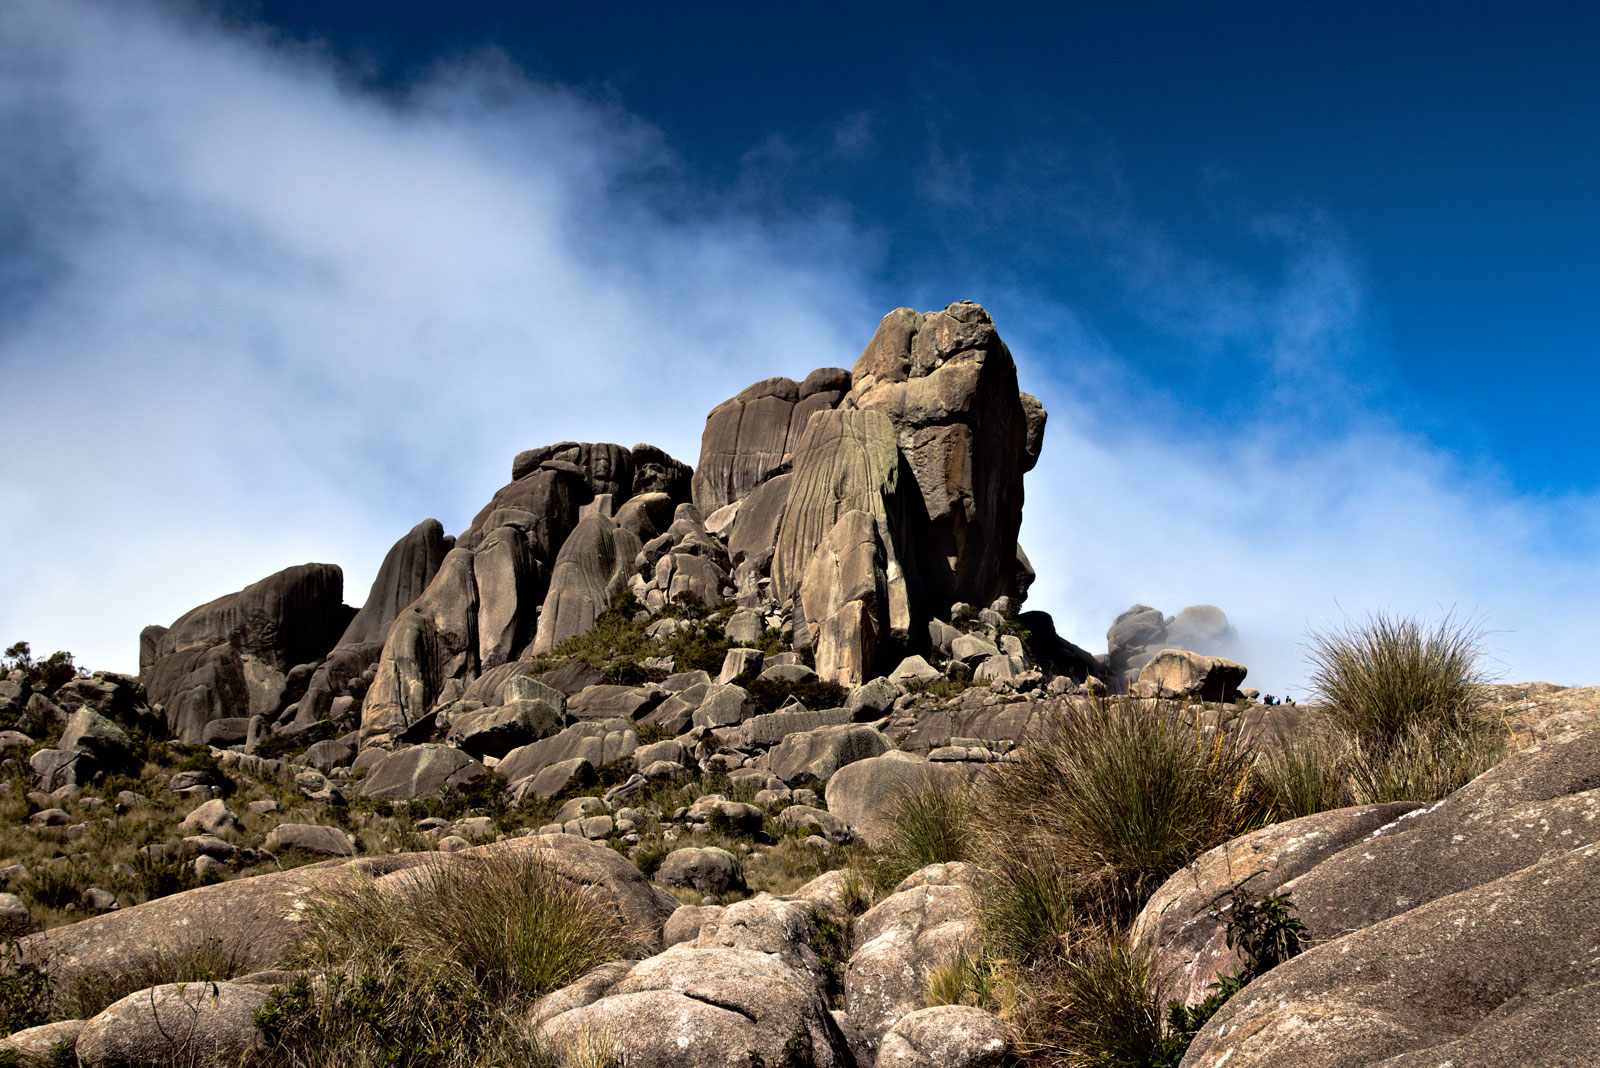 The deep blue sky in the Prateleiras mountain at Itatiaia. Stones are not yellow coloured. PRO1D+ Instant Action C-PL at 24mm.